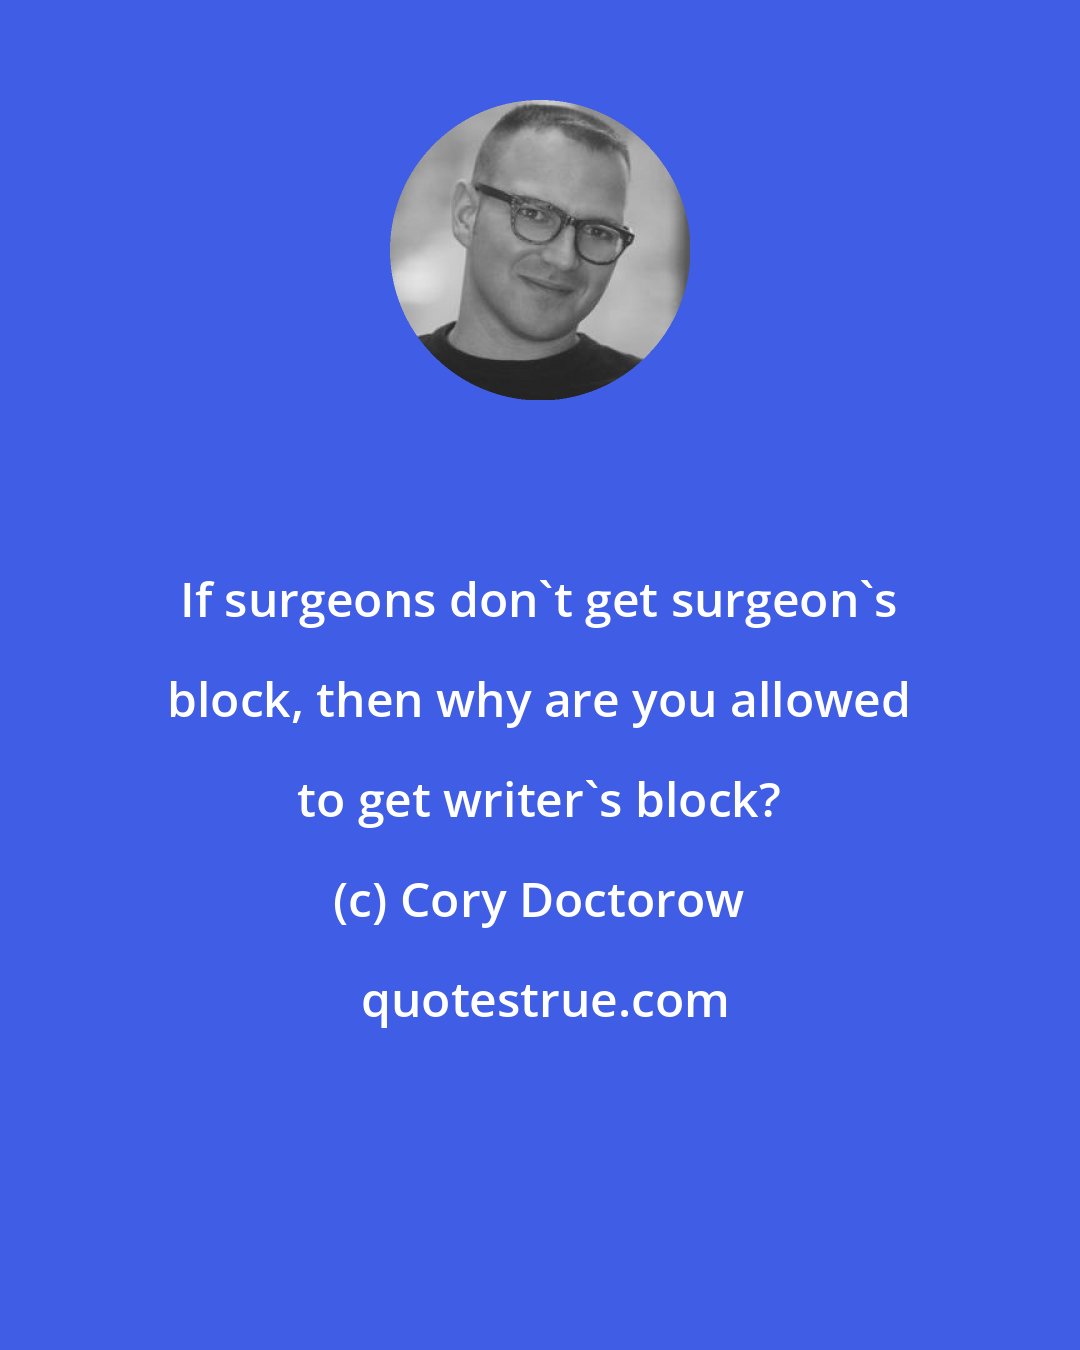 Cory Doctorow: If surgeons don't get surgeon's block, then why are you allowed to get writer's block?